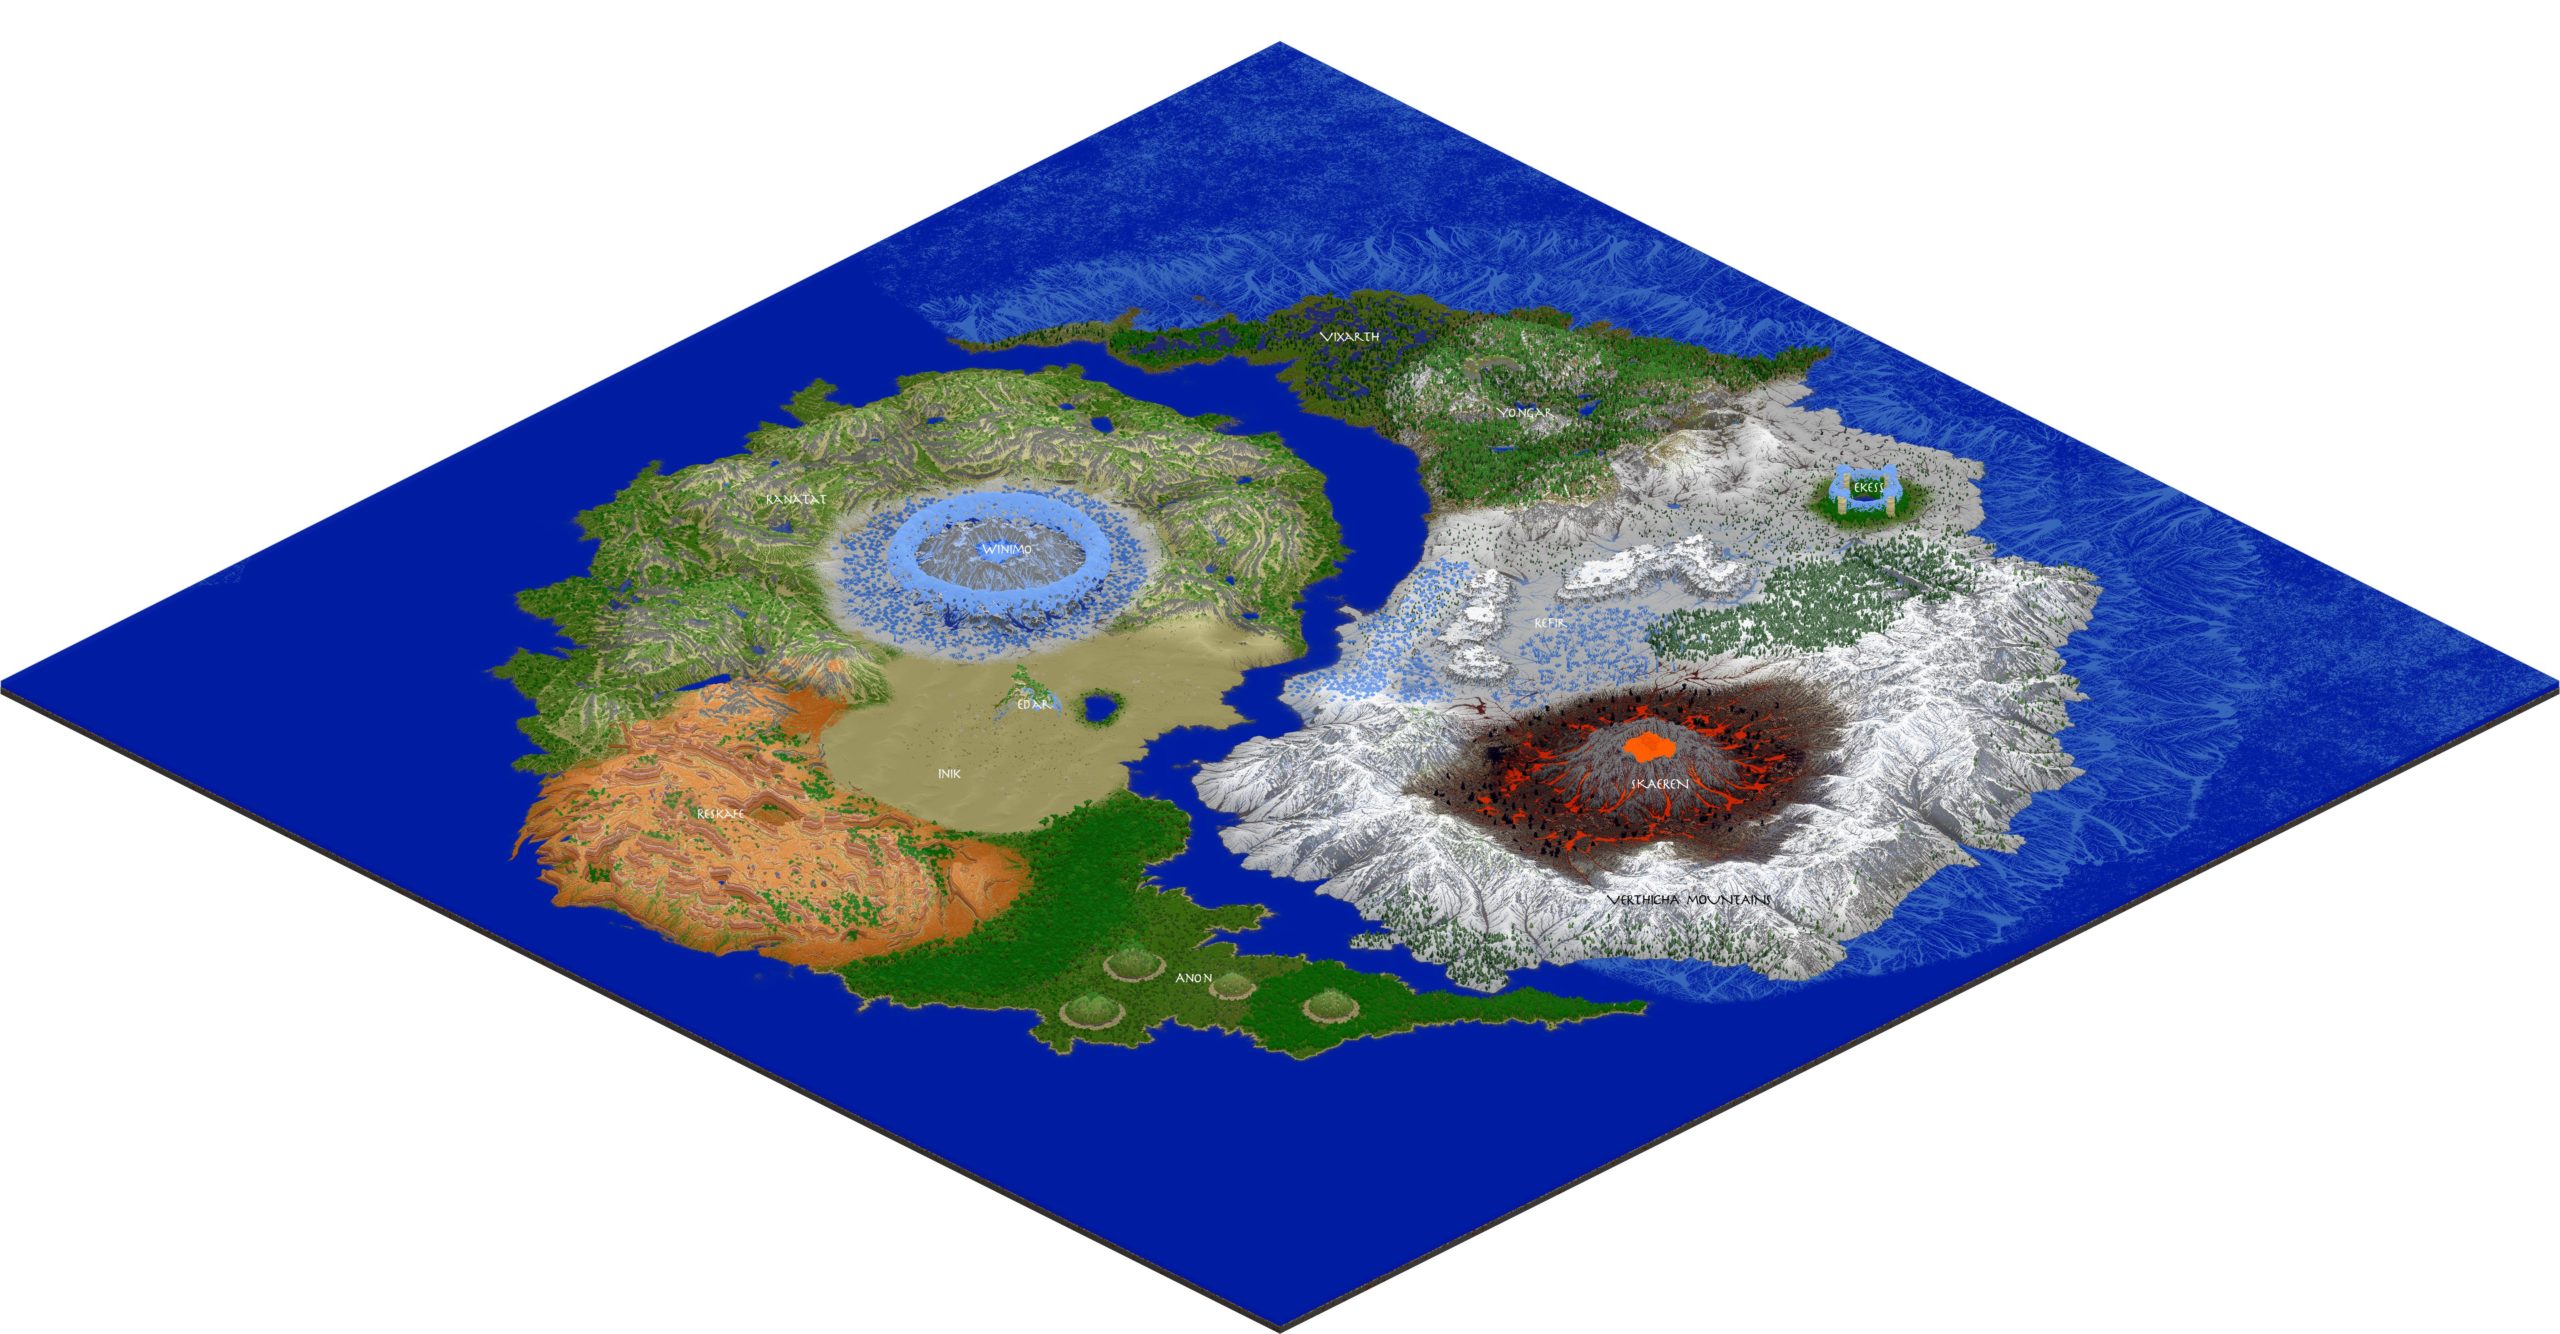 Minecraft Map Is Basically 36 Square Kilometres Of Primal Beauty